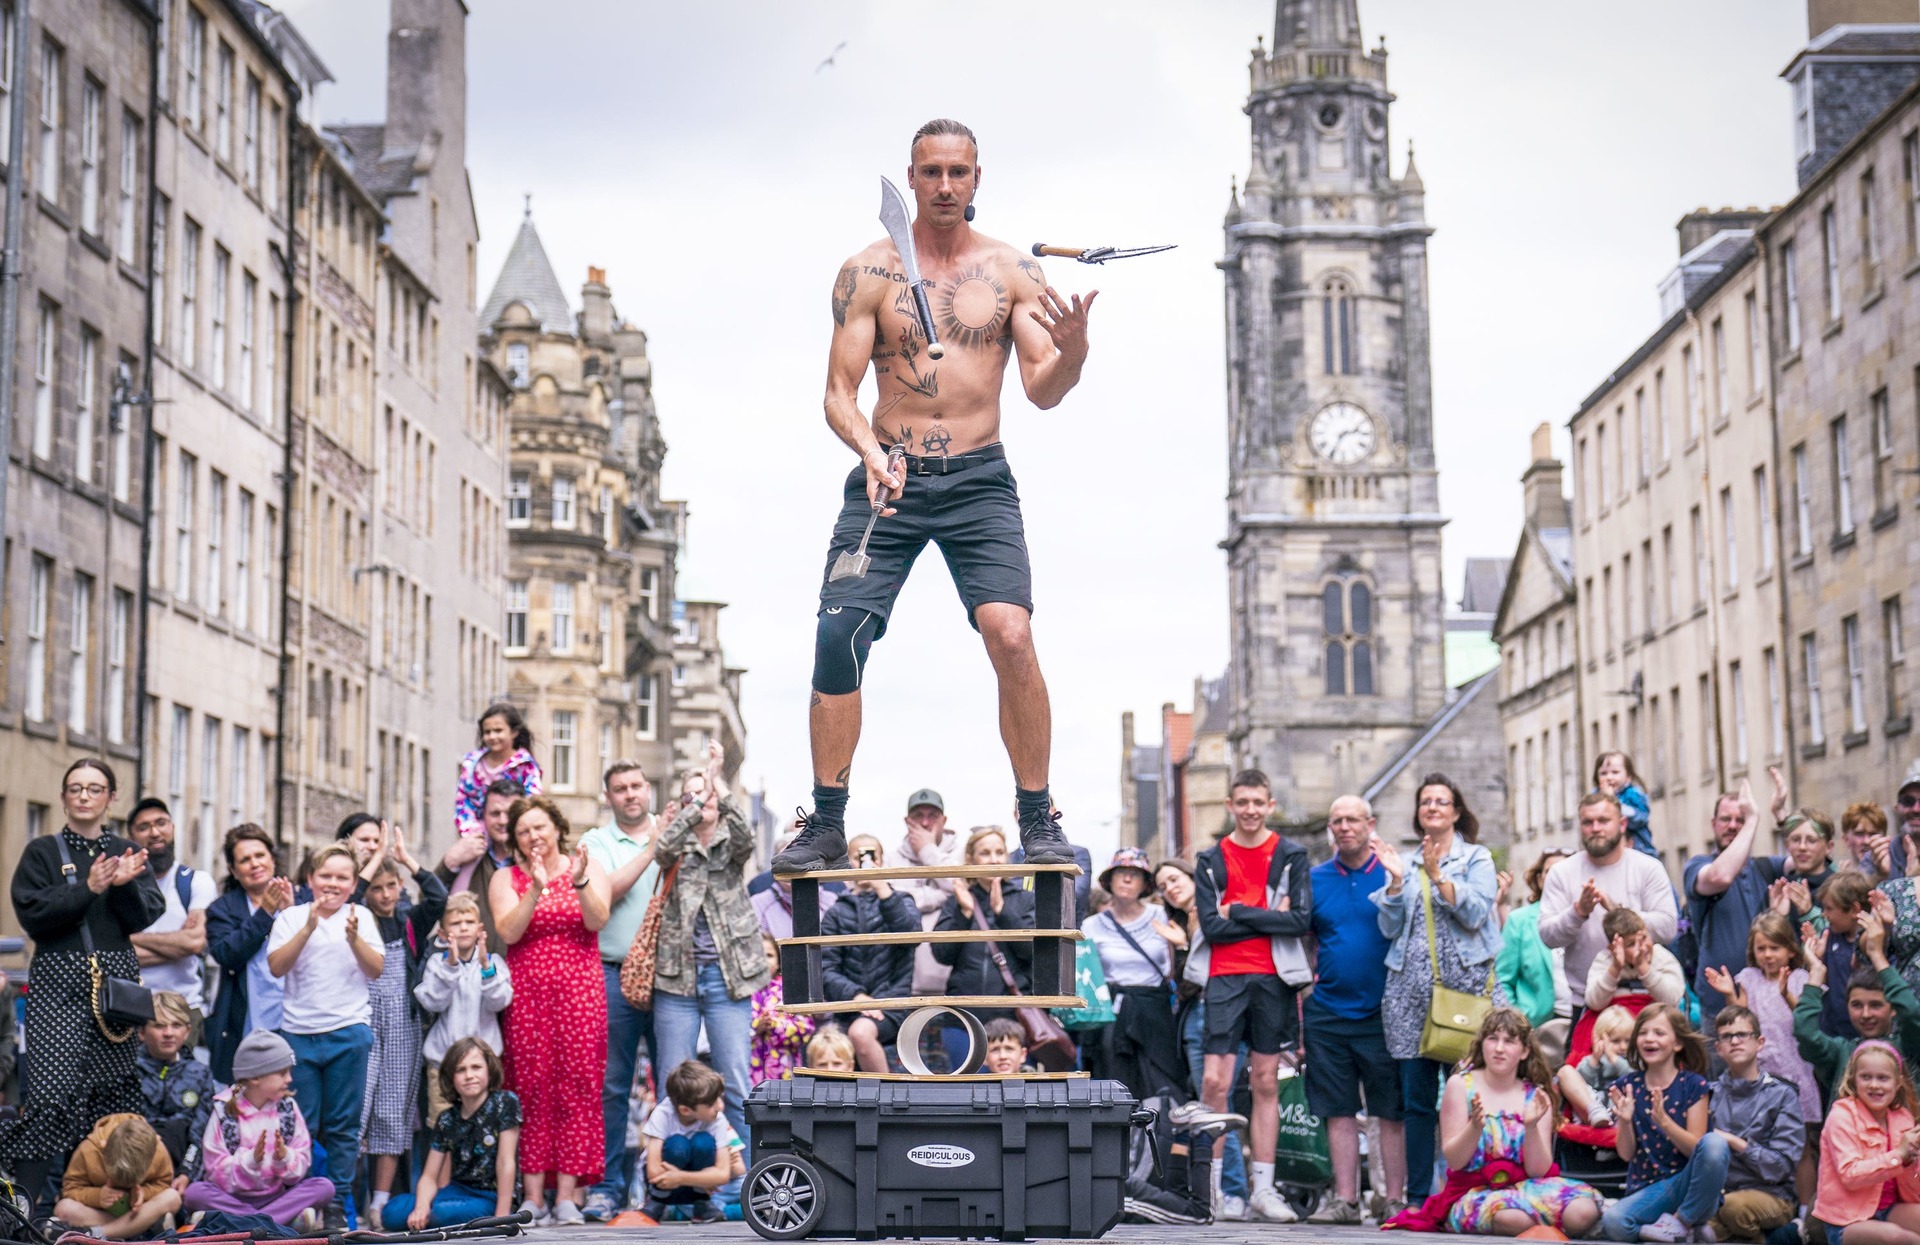 Edinburgh’s famous festival season attracts thousand of performers and tourists to the city in August.
